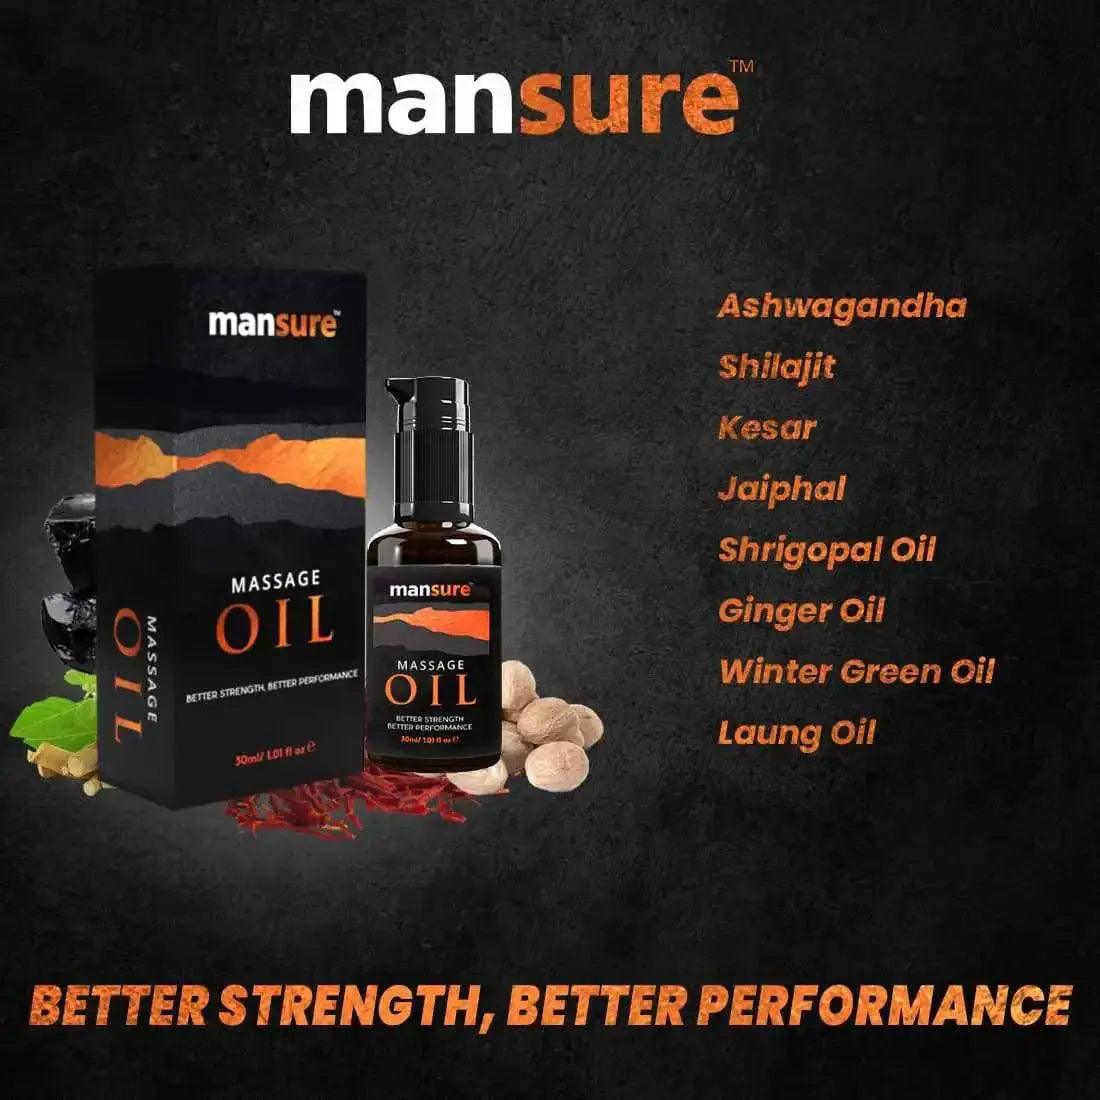 ManSure Massage Oil For Men's Health is Made From Premium Ingredients Such as Shilajit, Kesar and Shrigopal Oil